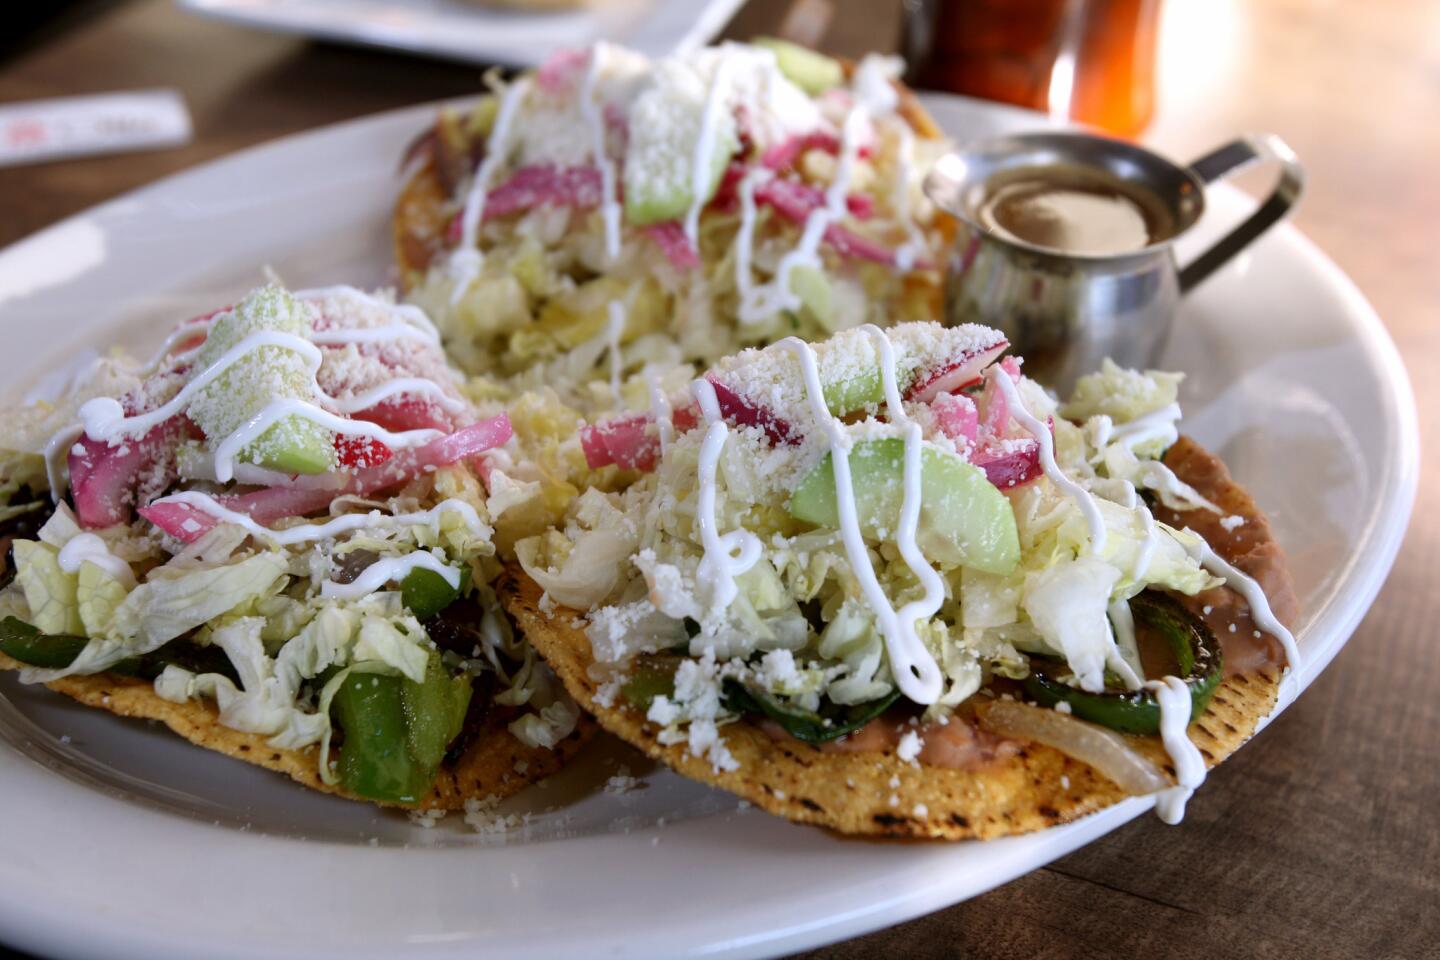 The Veggie tostadas come with tomato, bell pepper, red and white onions, cucumbers, Cotija cheese and Mexican sour cream, at Cafe de Olla restaurant, on the 2300 block of Victory Blvd. in Burbank on Tuesday, December 29, 2015. The Mexican and American traditional food restaurant opened in October 2015.